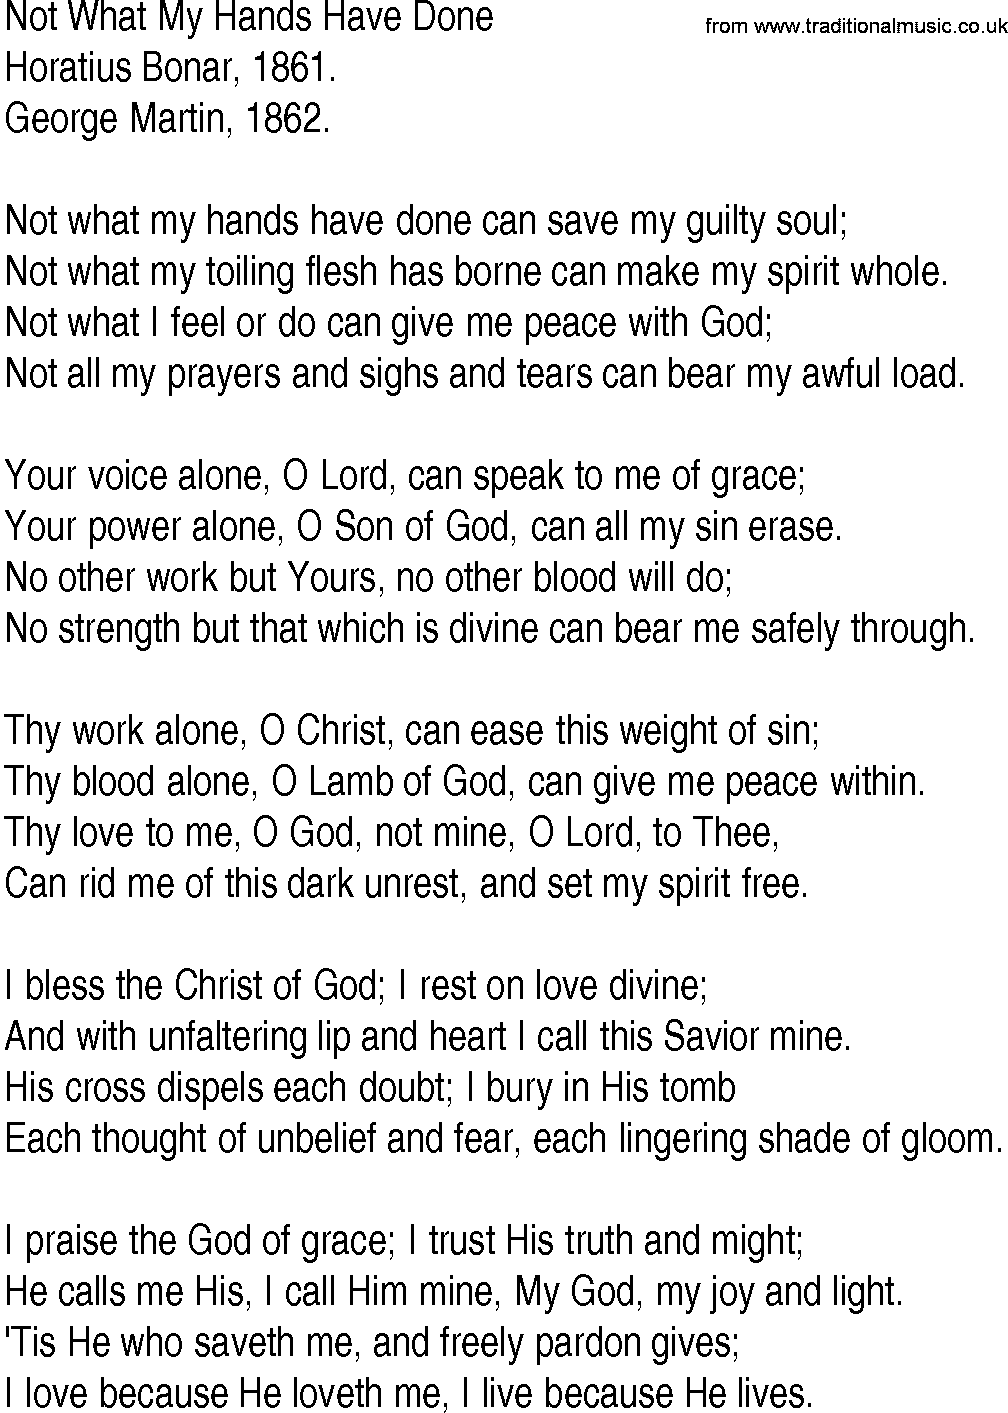 Hymn and Gospel Song: Not What My Hands Have Done by Horatius Bonar lyrics